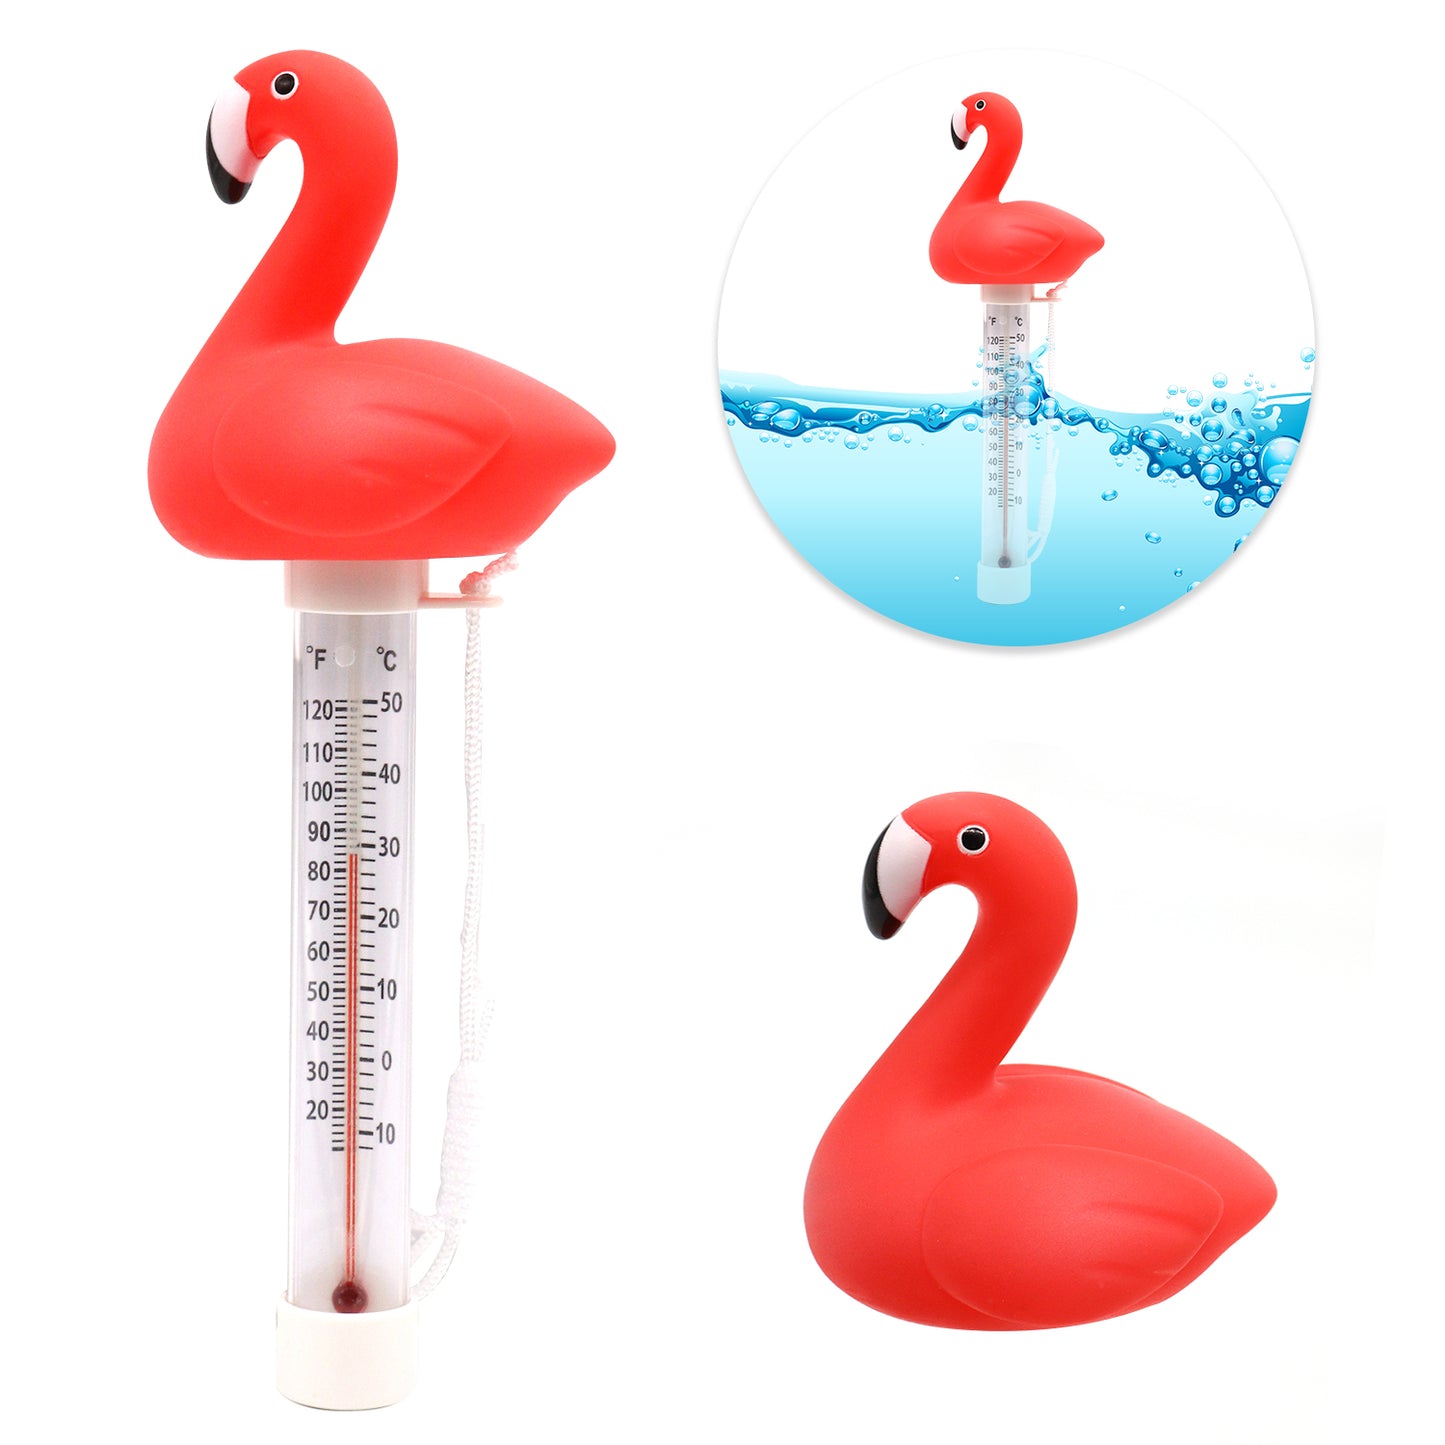 XY-WQ Floating Pool Thermometer, Large Size Easy Read for Water Temperature, Shatter Resistant with String for Outdoor and Indoor Swimming Pools and Spas (Flamingo)